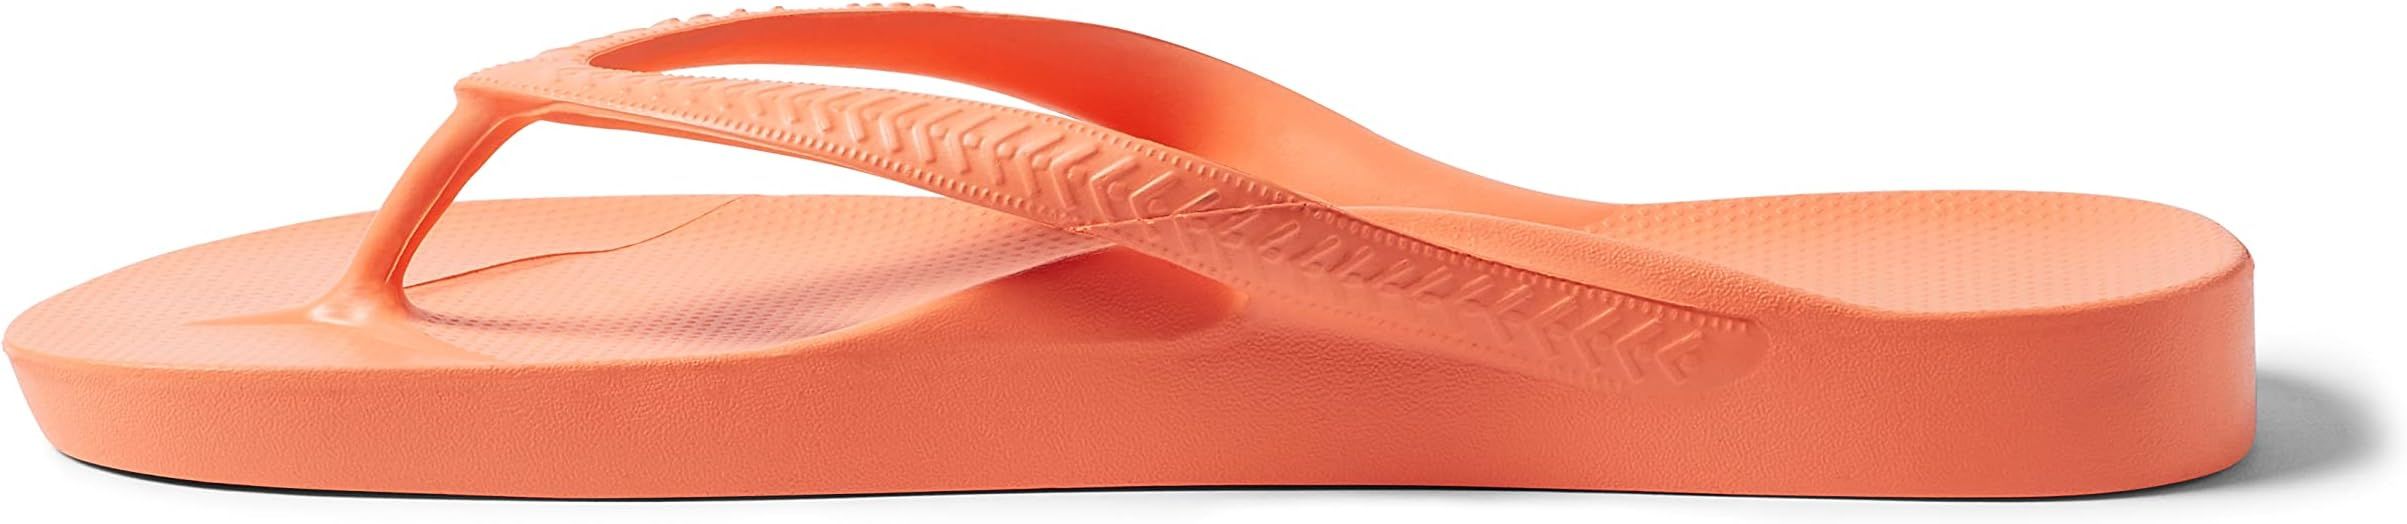 ARCHIES Footwear - Flip Flop Sandals – Offering Great Arch Support and Comfort | Amazon (US)